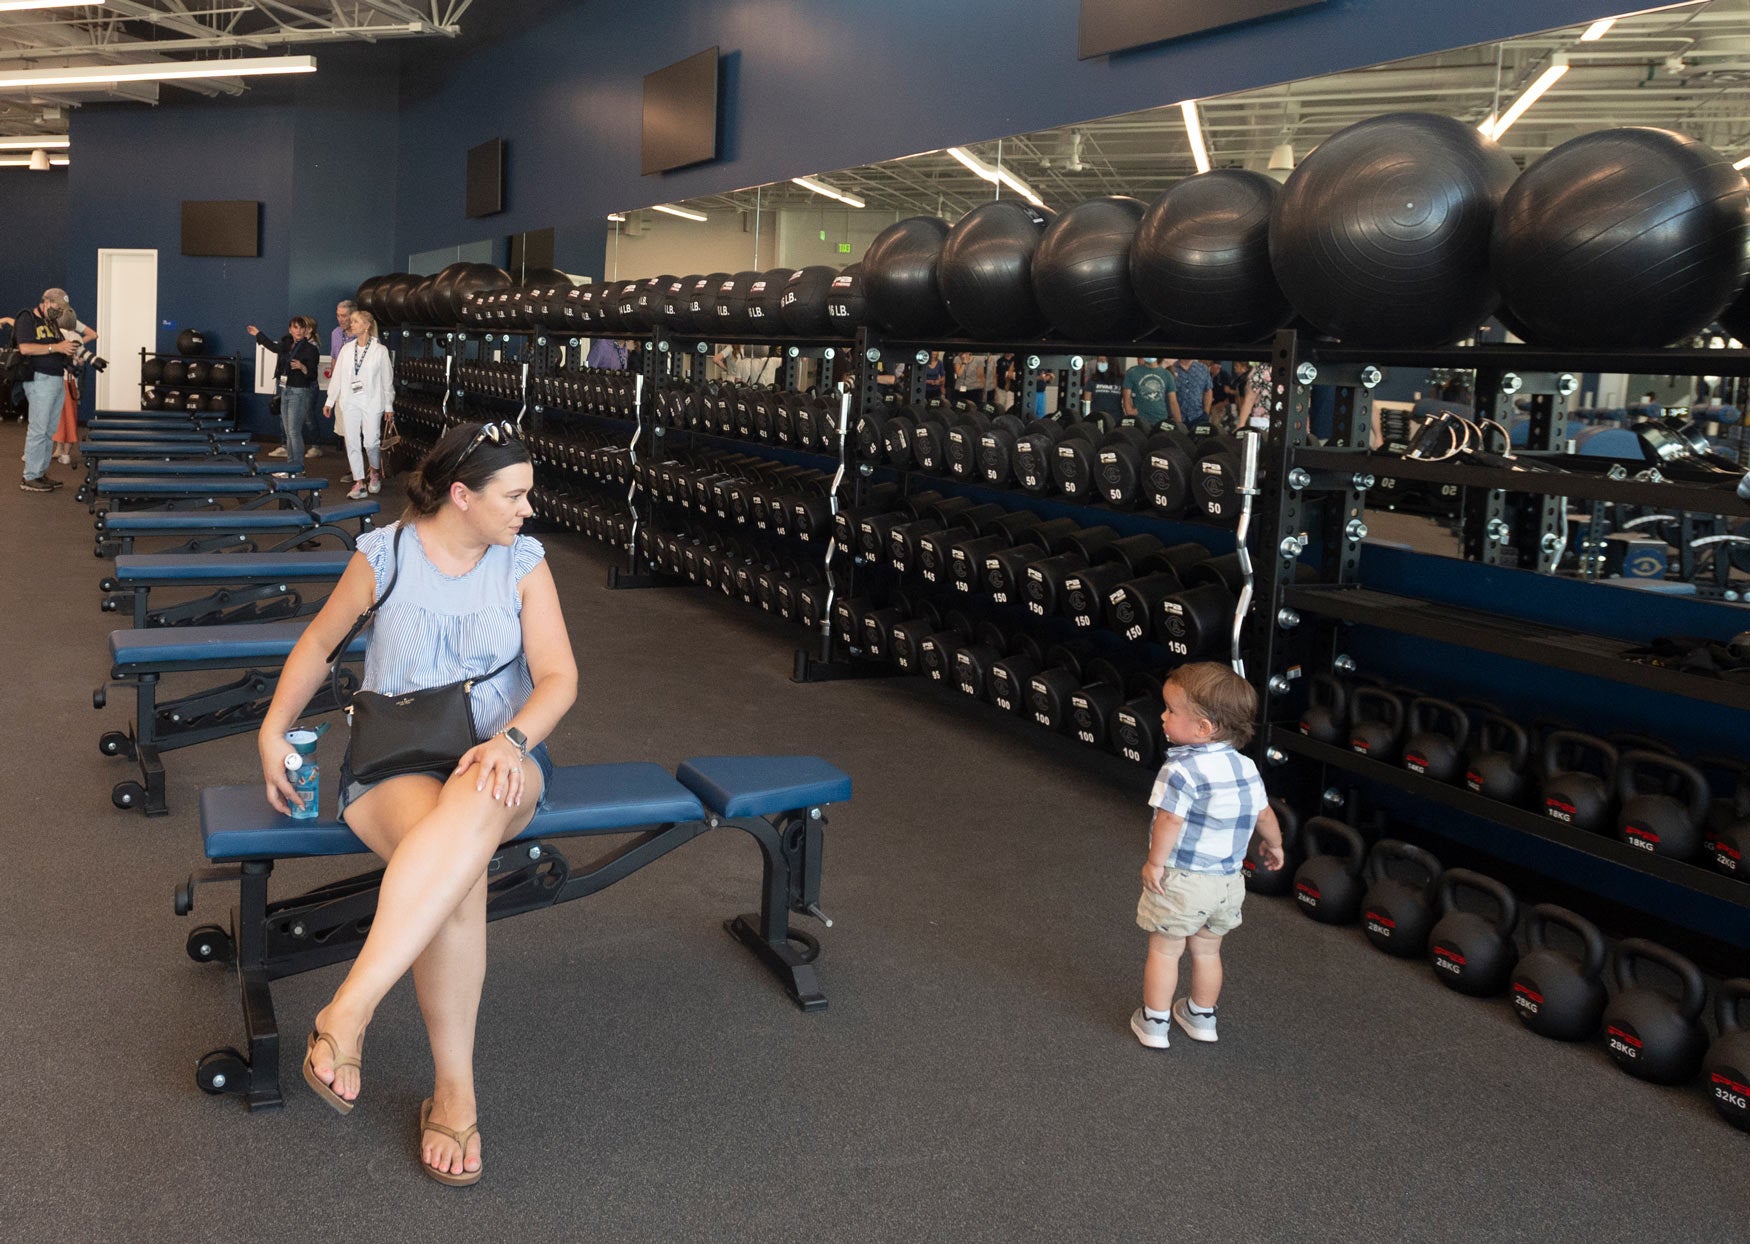 Mother seated with toddler looking at weights, wanting to use them?